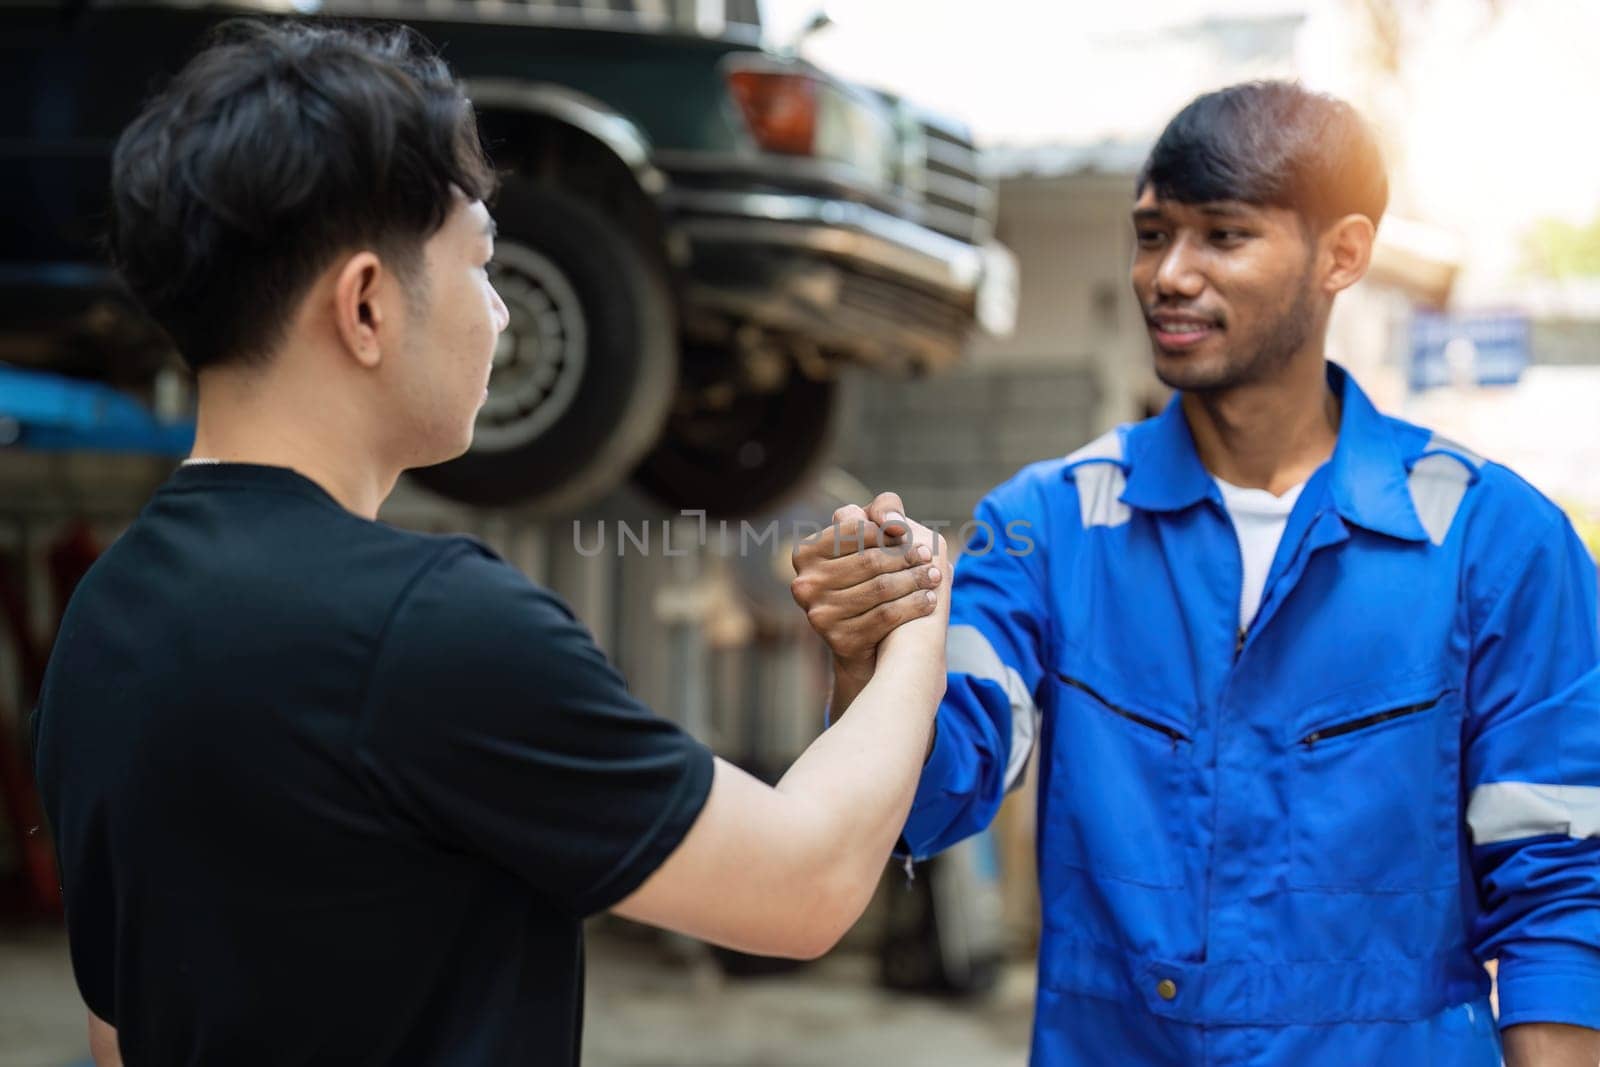 Two car mechanic team shaking hand at automobile service center. Repair service concept. Car repair and maintenance. Car mechanic working at automotive team service center by wichayada